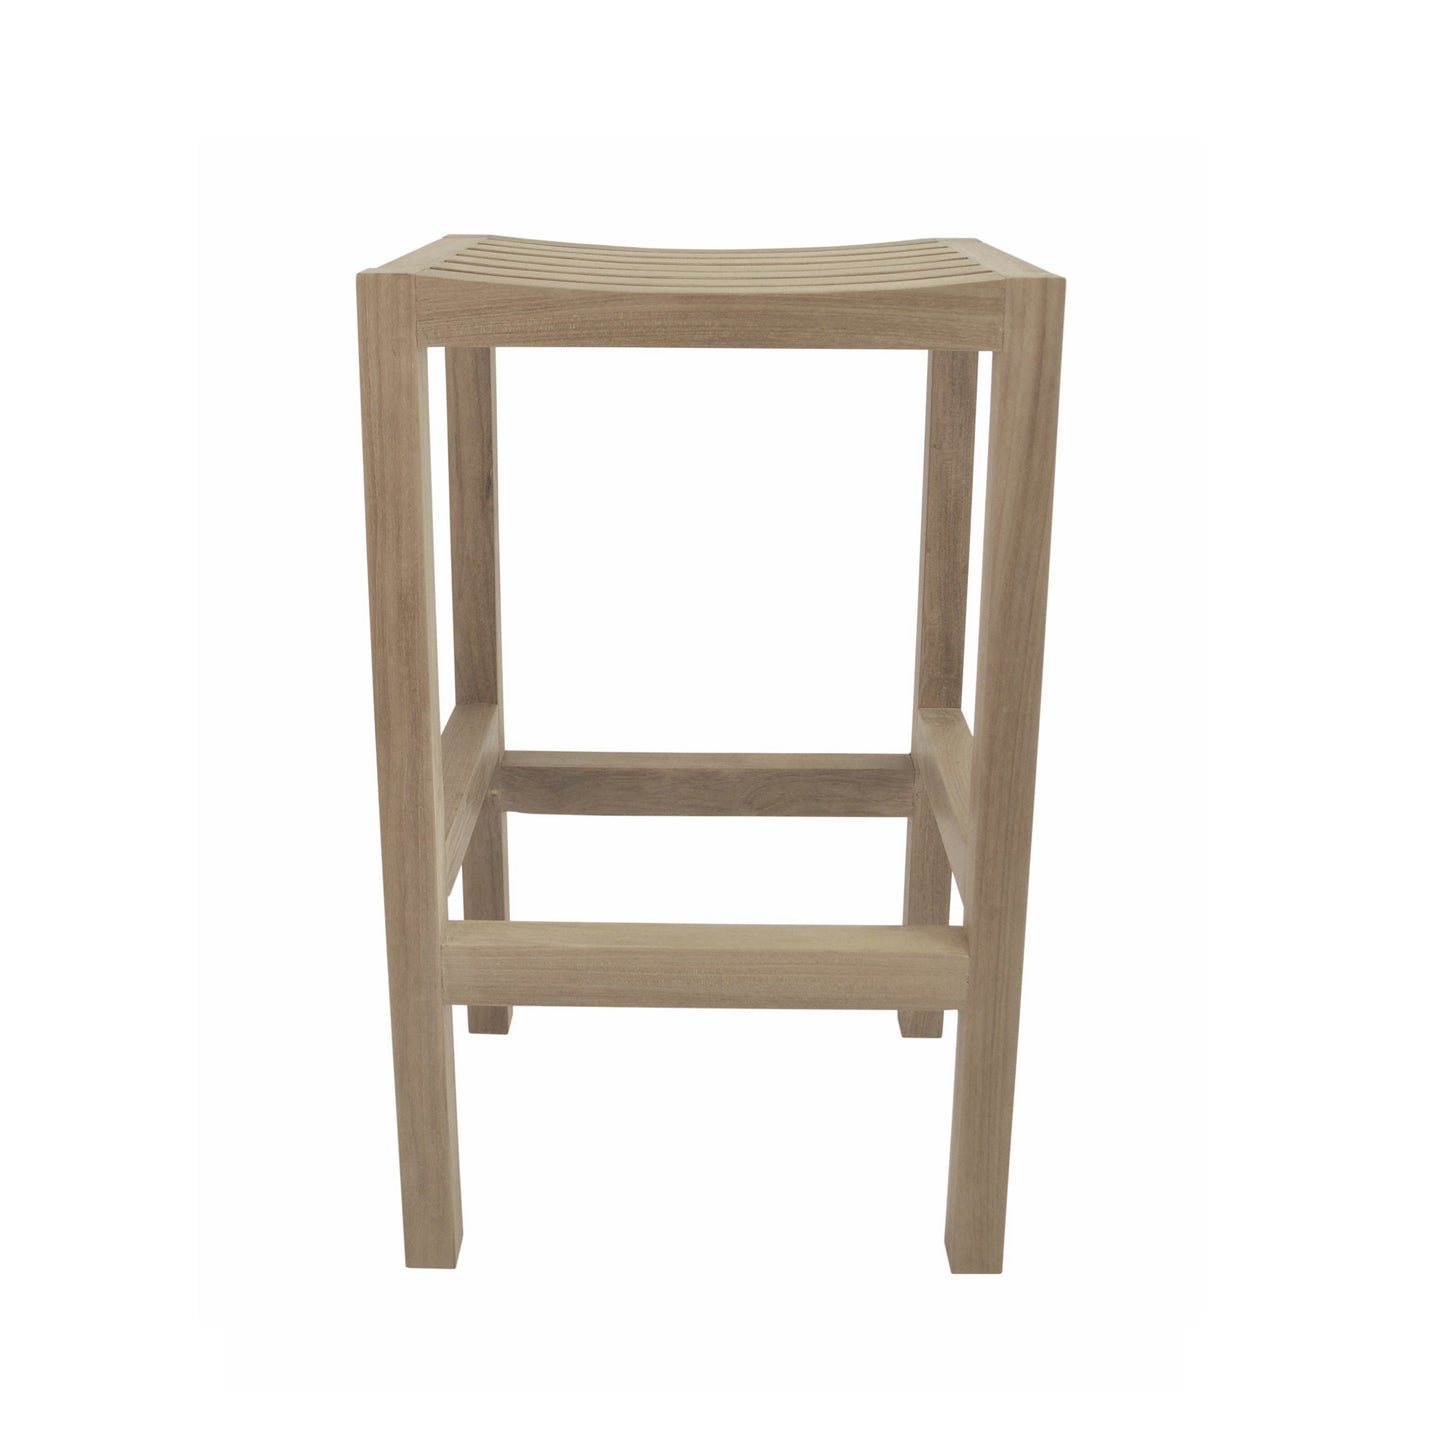 New Montego Backless Bar Chair